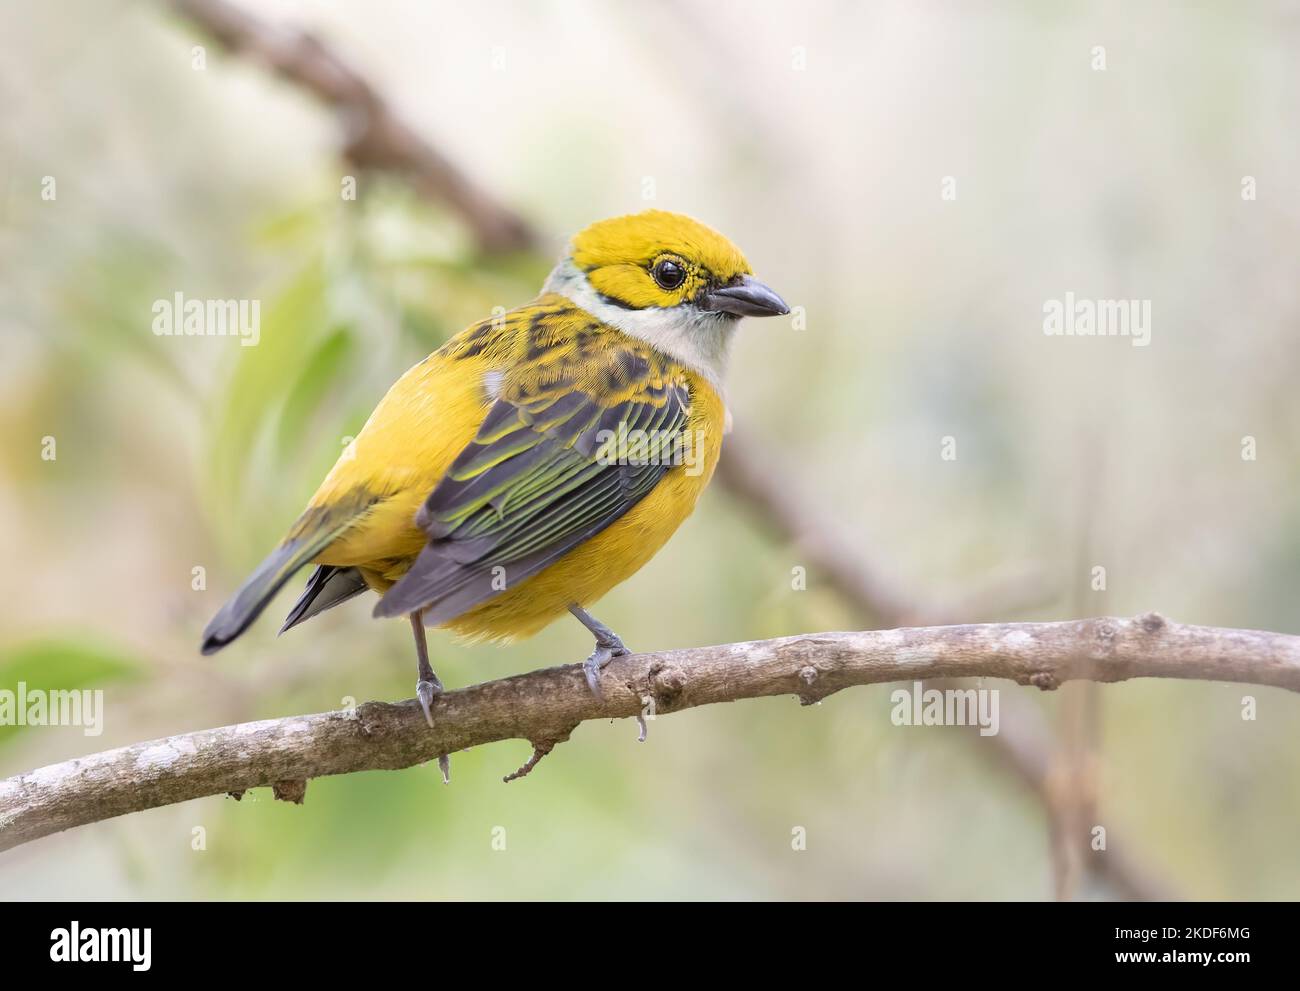 Silver-throated tanager perched on a mossy branch in Costa Rica Stock Photo